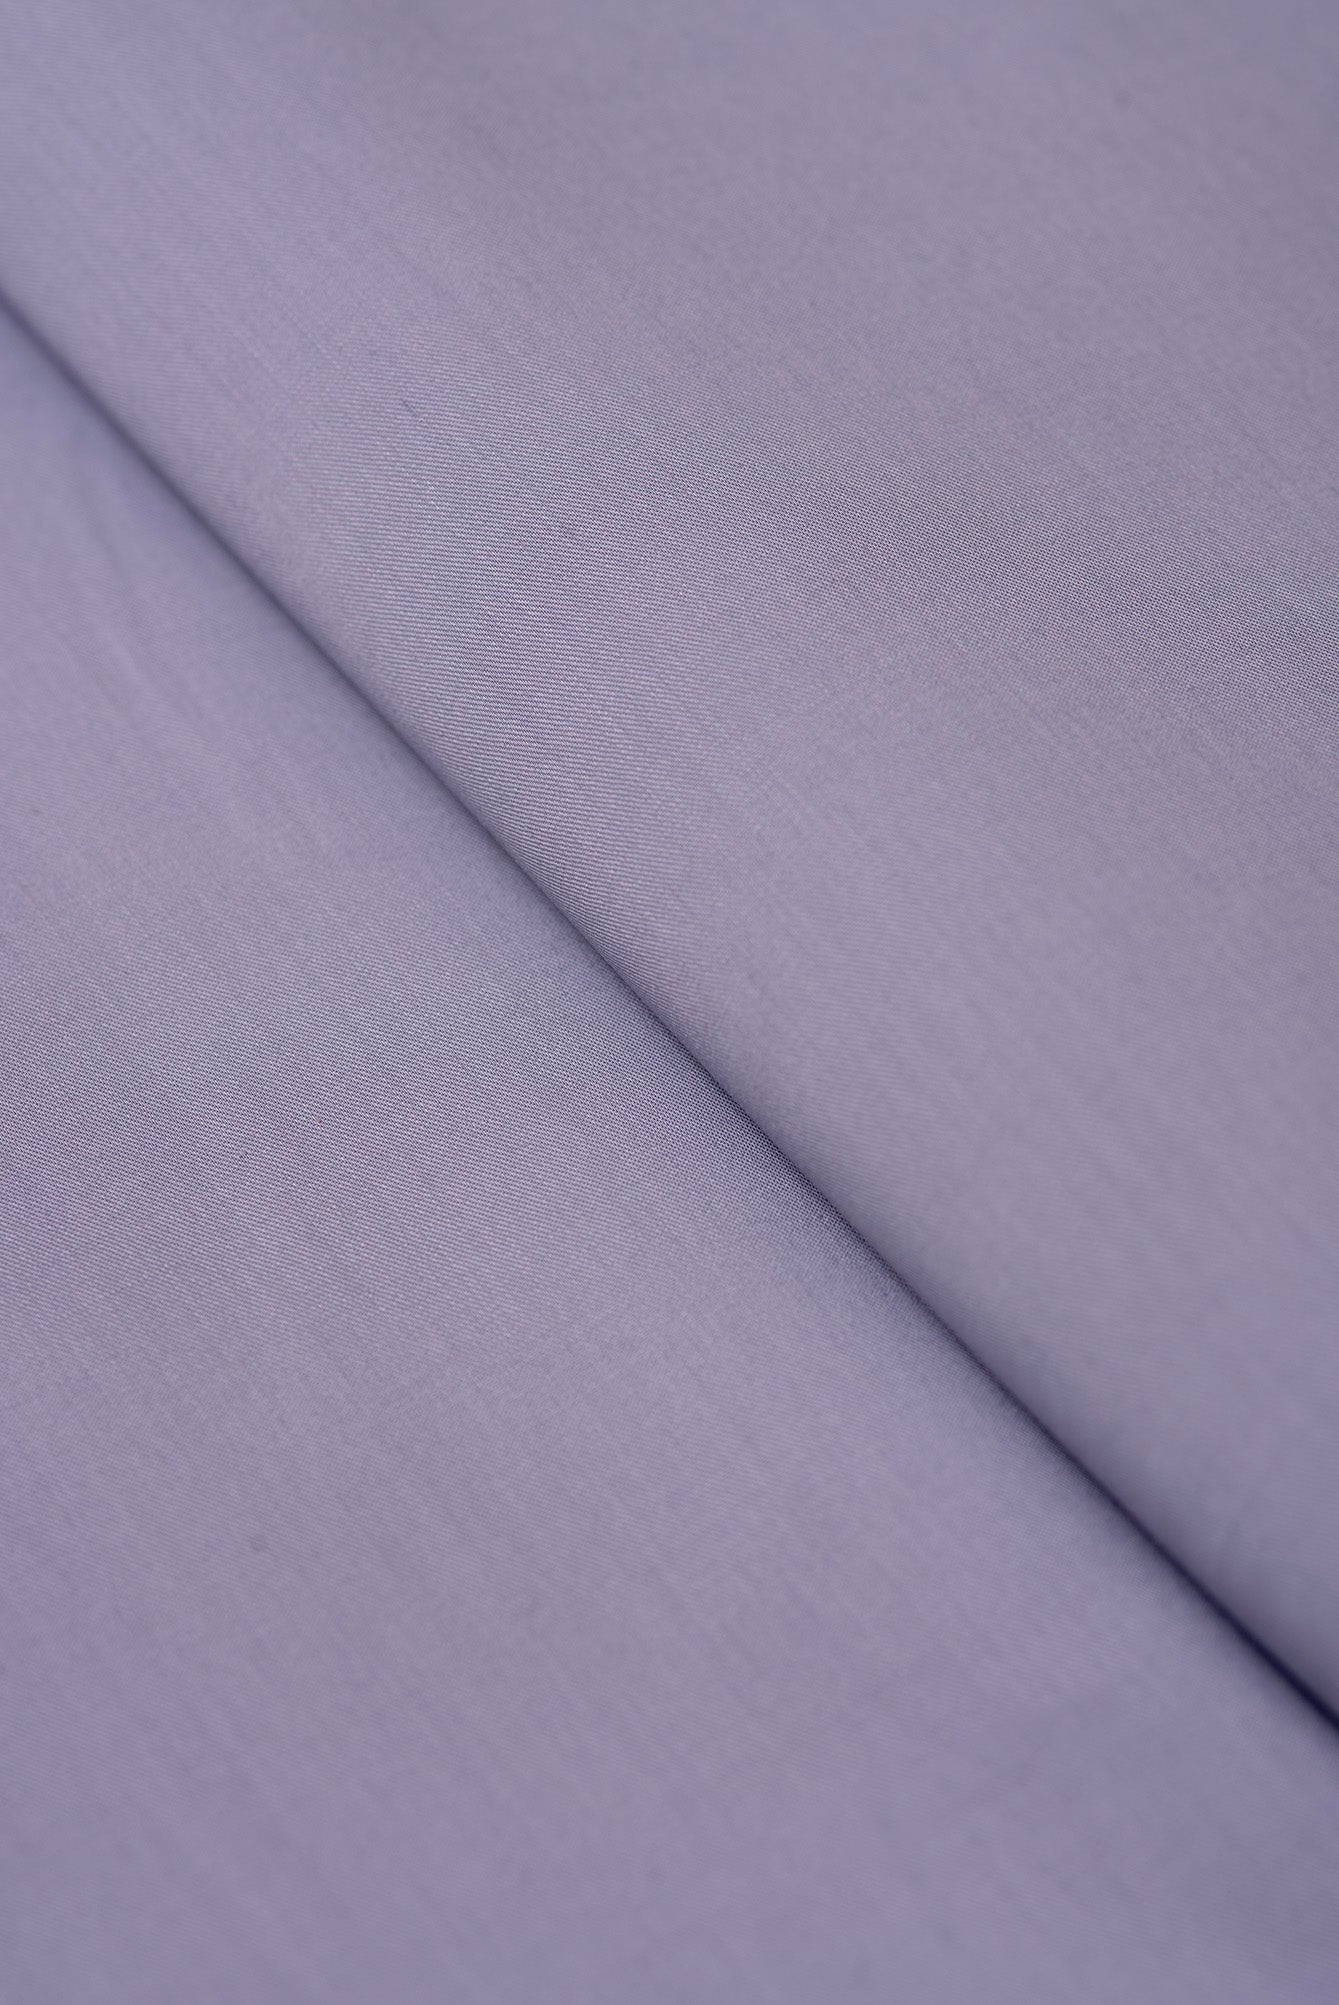 COTTON FABRIC GREY GLF-IMPERIAL